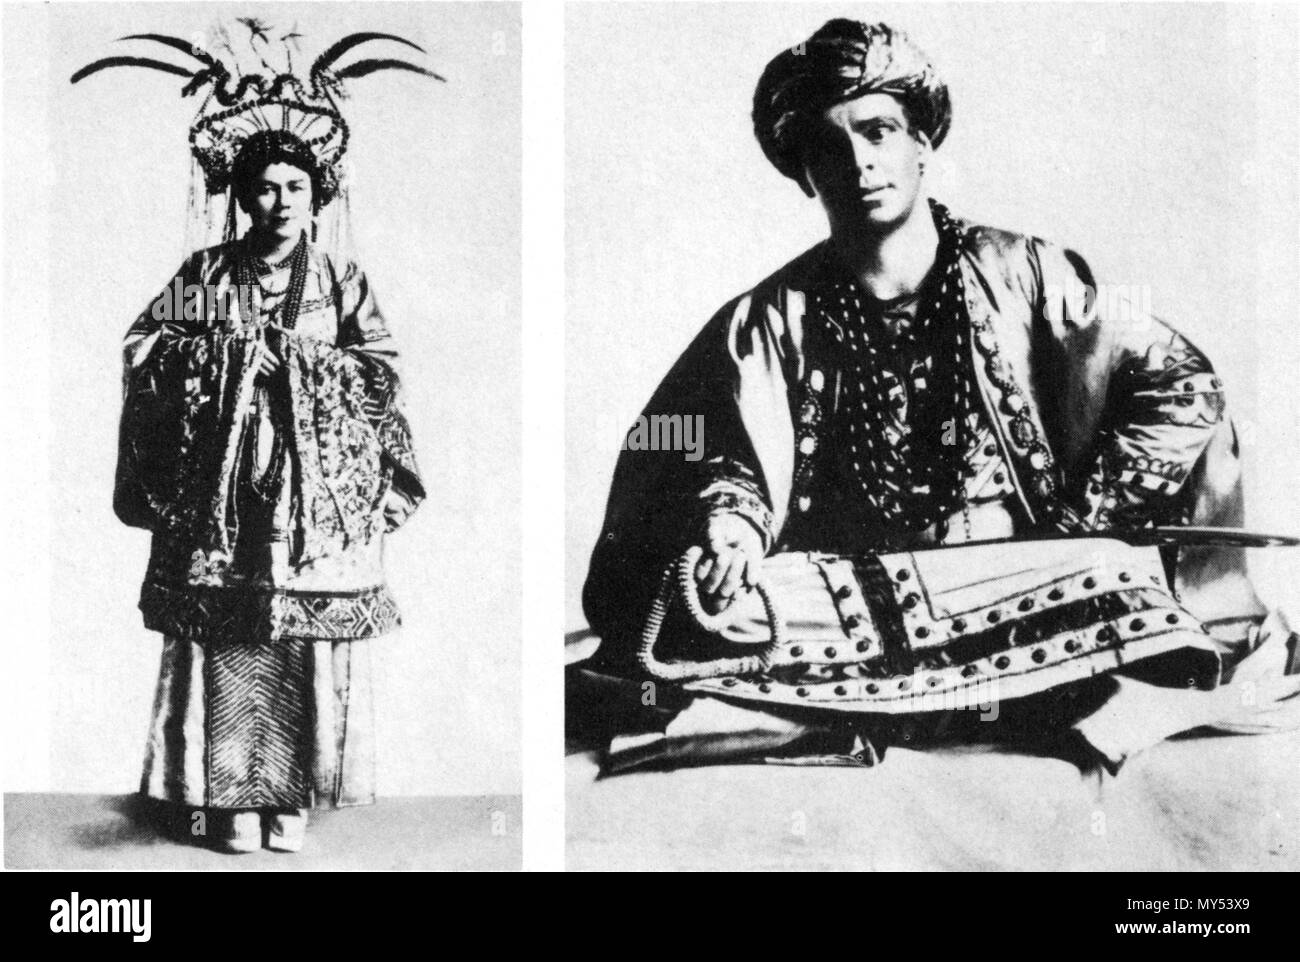 . English: Gertud Eysoldt as Turandot; Alexander Moissi as Calaf. Photos from the program book for Max Reinhardt's 1911 production of Gozzi's Turandot with incidental music by Ferruccio Busoni. First published 1911.. Unknown 71 Berlin 1911 - Eysoldt &amp; Moissi Stock Photo